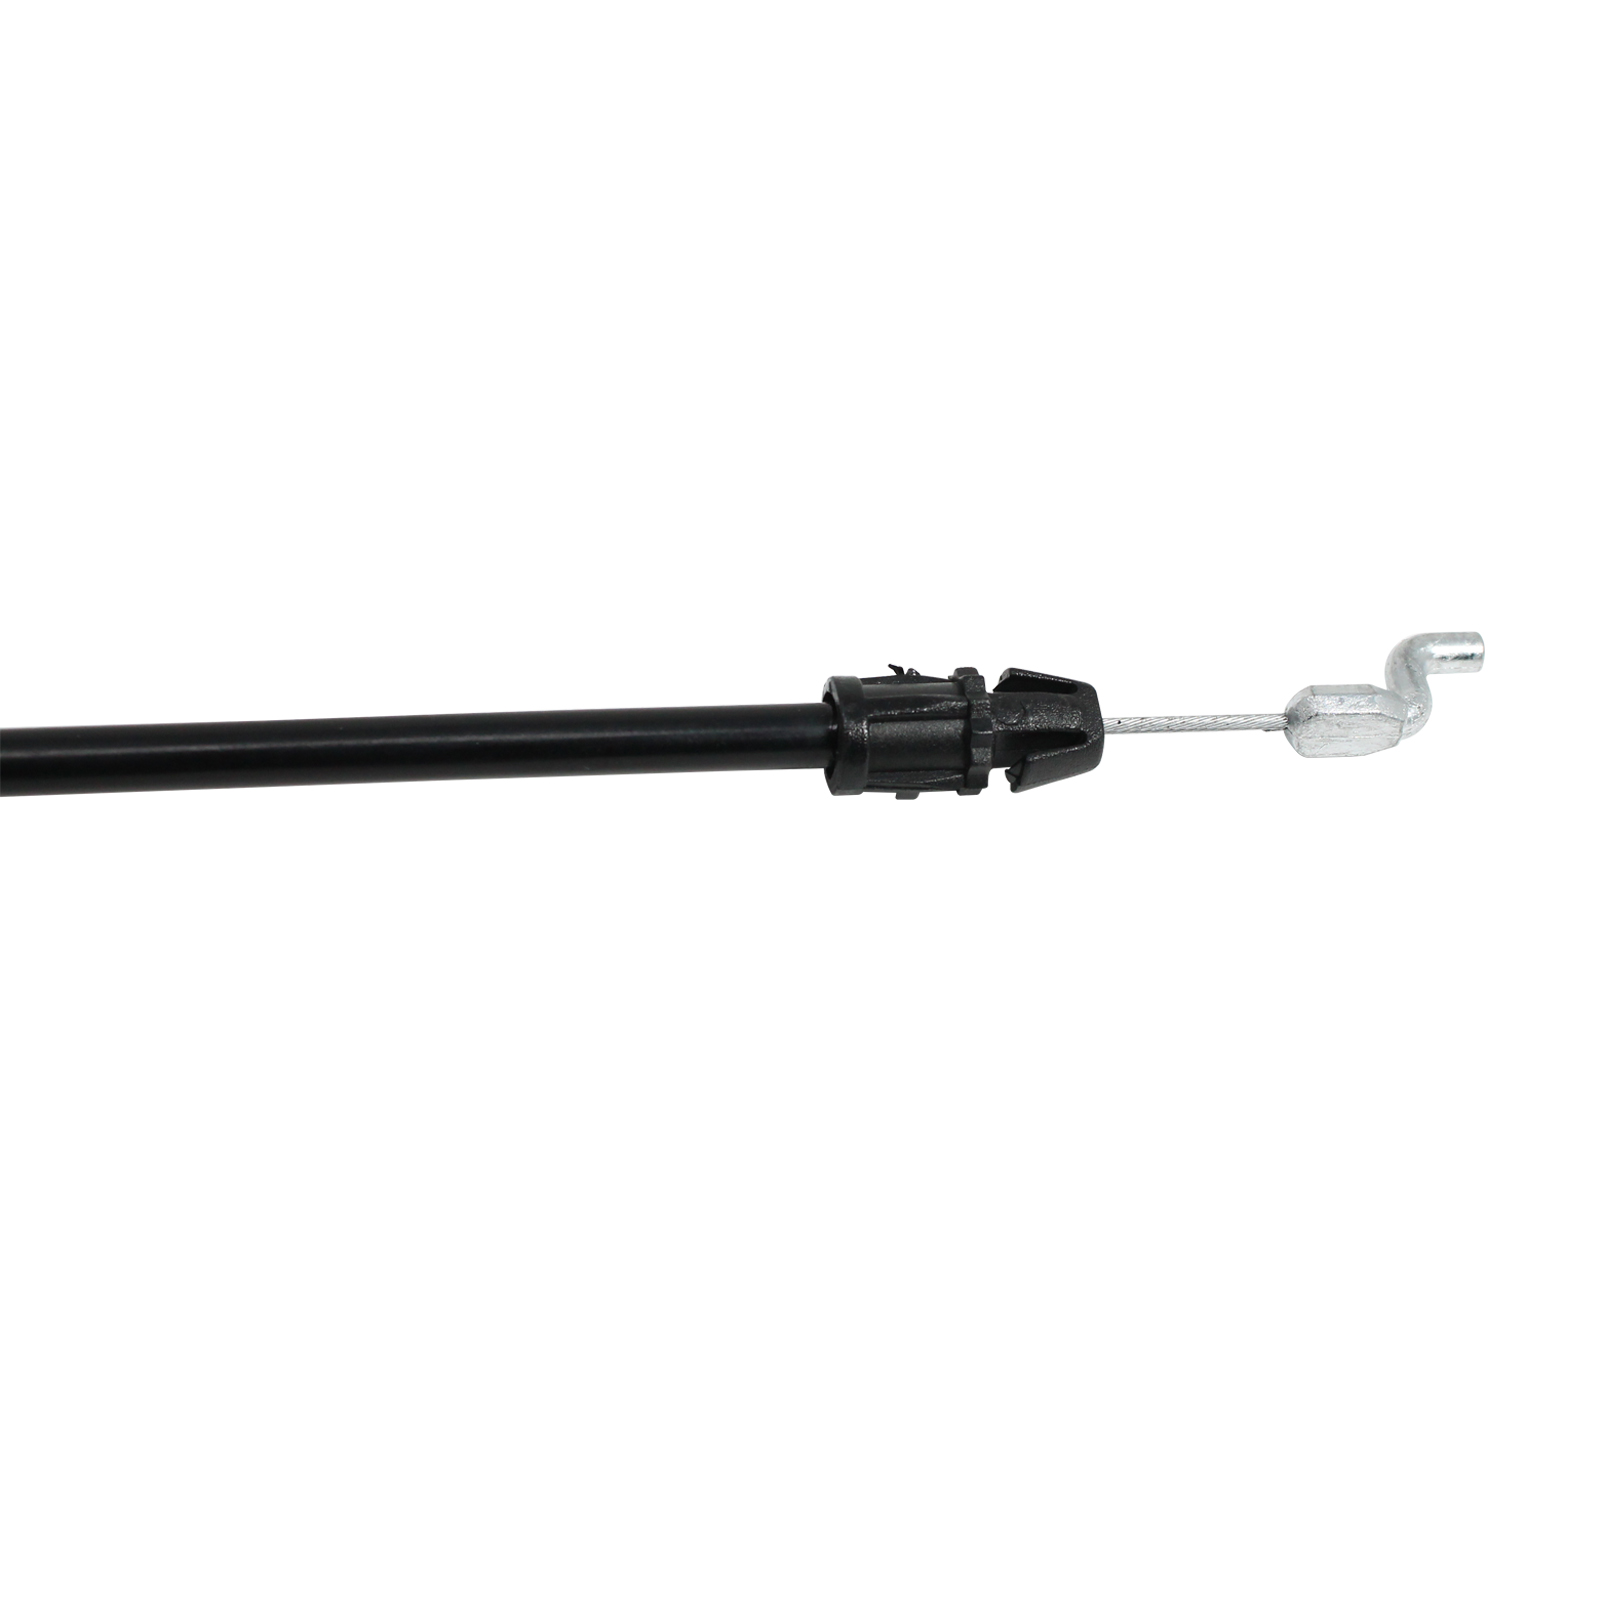 2-Pack 532176556 Engine Cable Replacement for Husqvarna ROTARY LAWN MOWER (96134000600) (2007-11) Lawn Mower: Consumer Walk Behind - Compatible with 176556 162778 Zone Control Cable - image 3 of 4